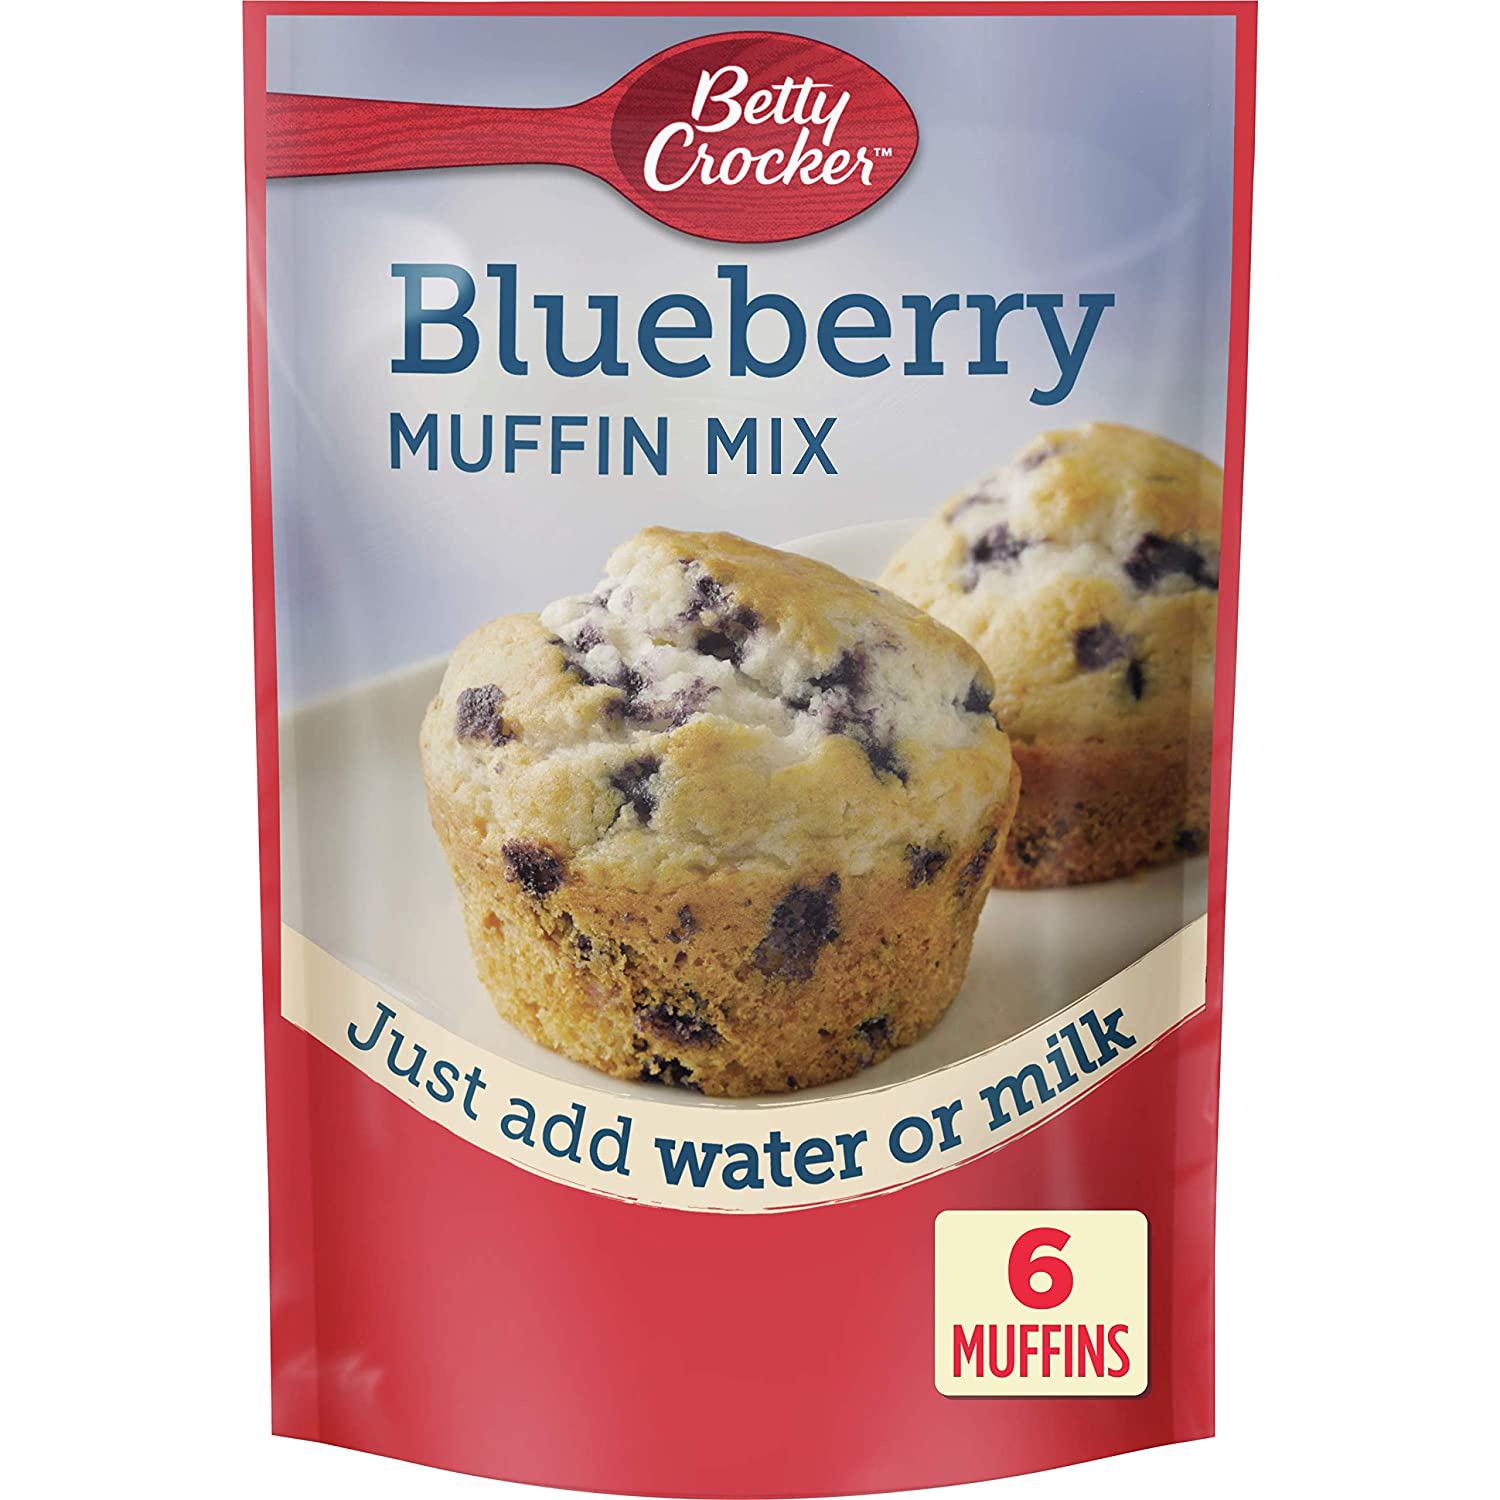 9 Betty Crocker Blueberry Muffin Mix for $6.75 Shipped